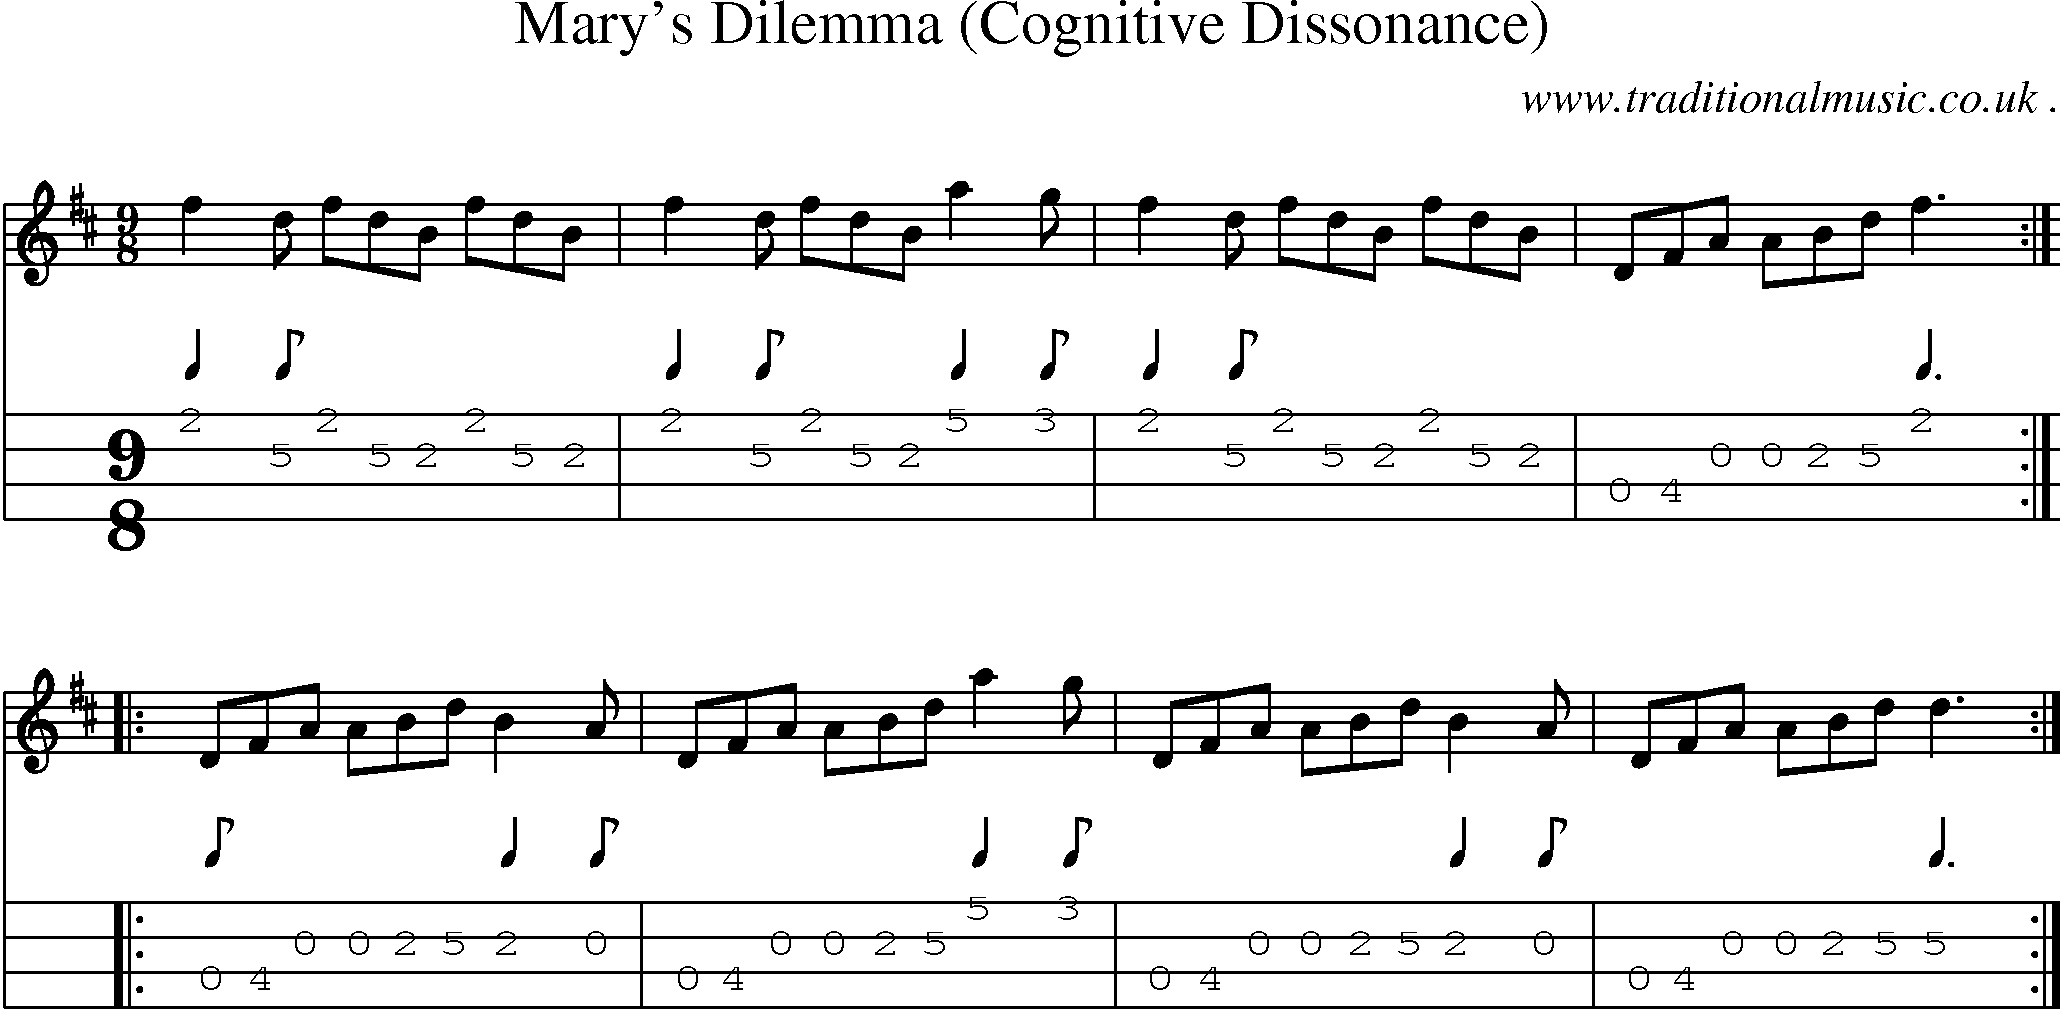 Sheet-Music and Mandolin Tabs for Marys Dilemma (cognitive Dissonance)